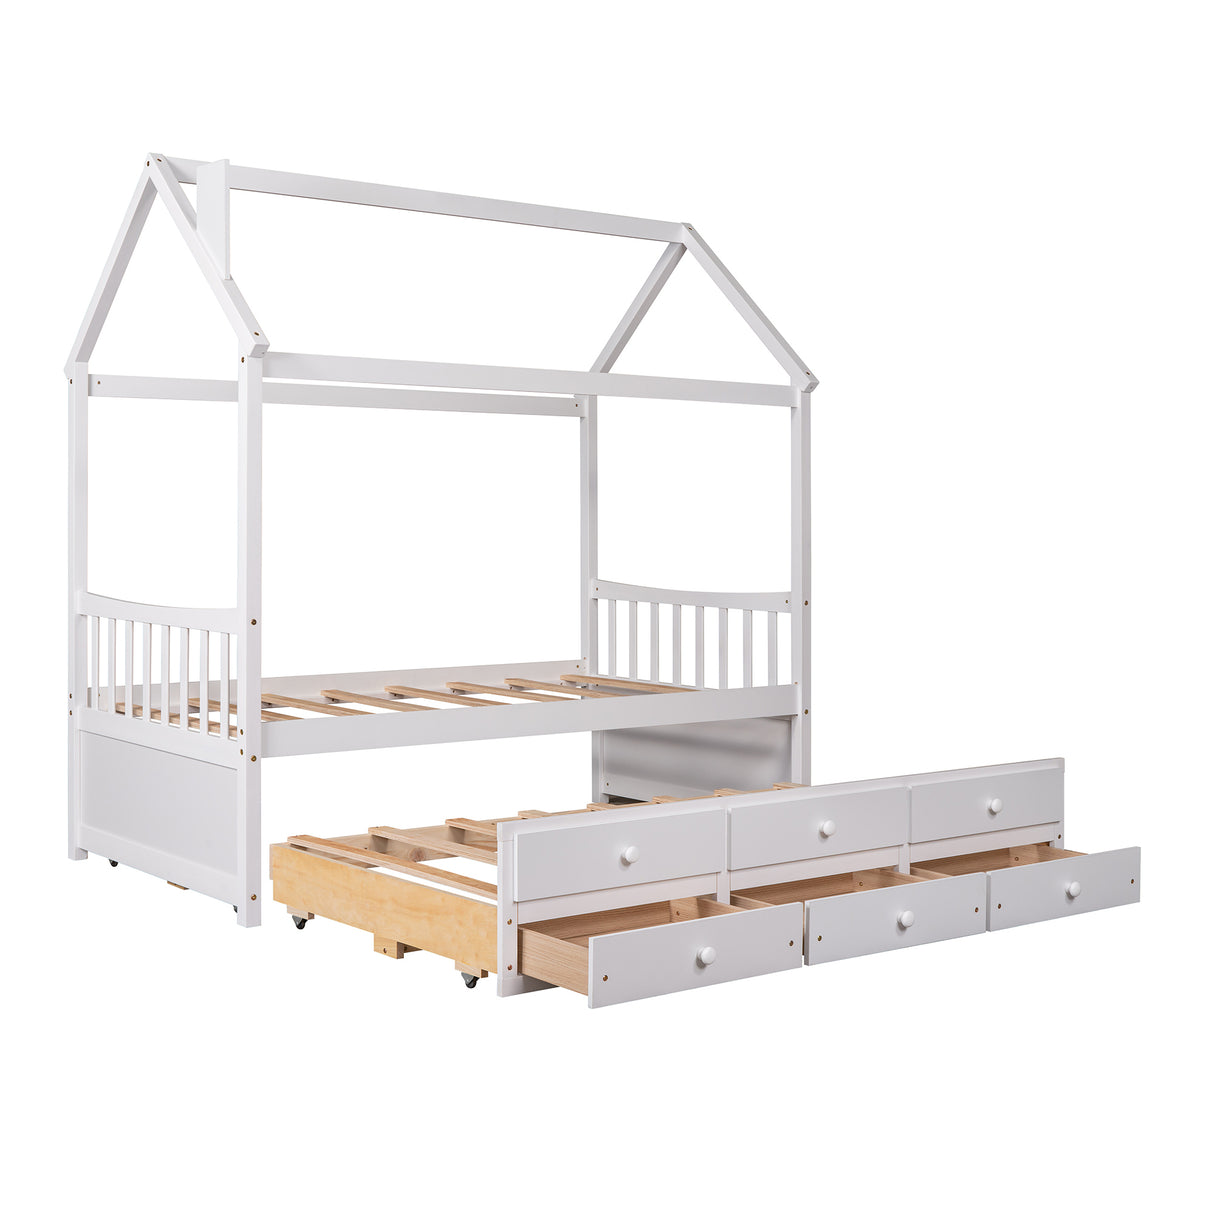 Twin size Wooden House Bed with Trundle and 3 Storage Drawers-White - Home Elegance USA